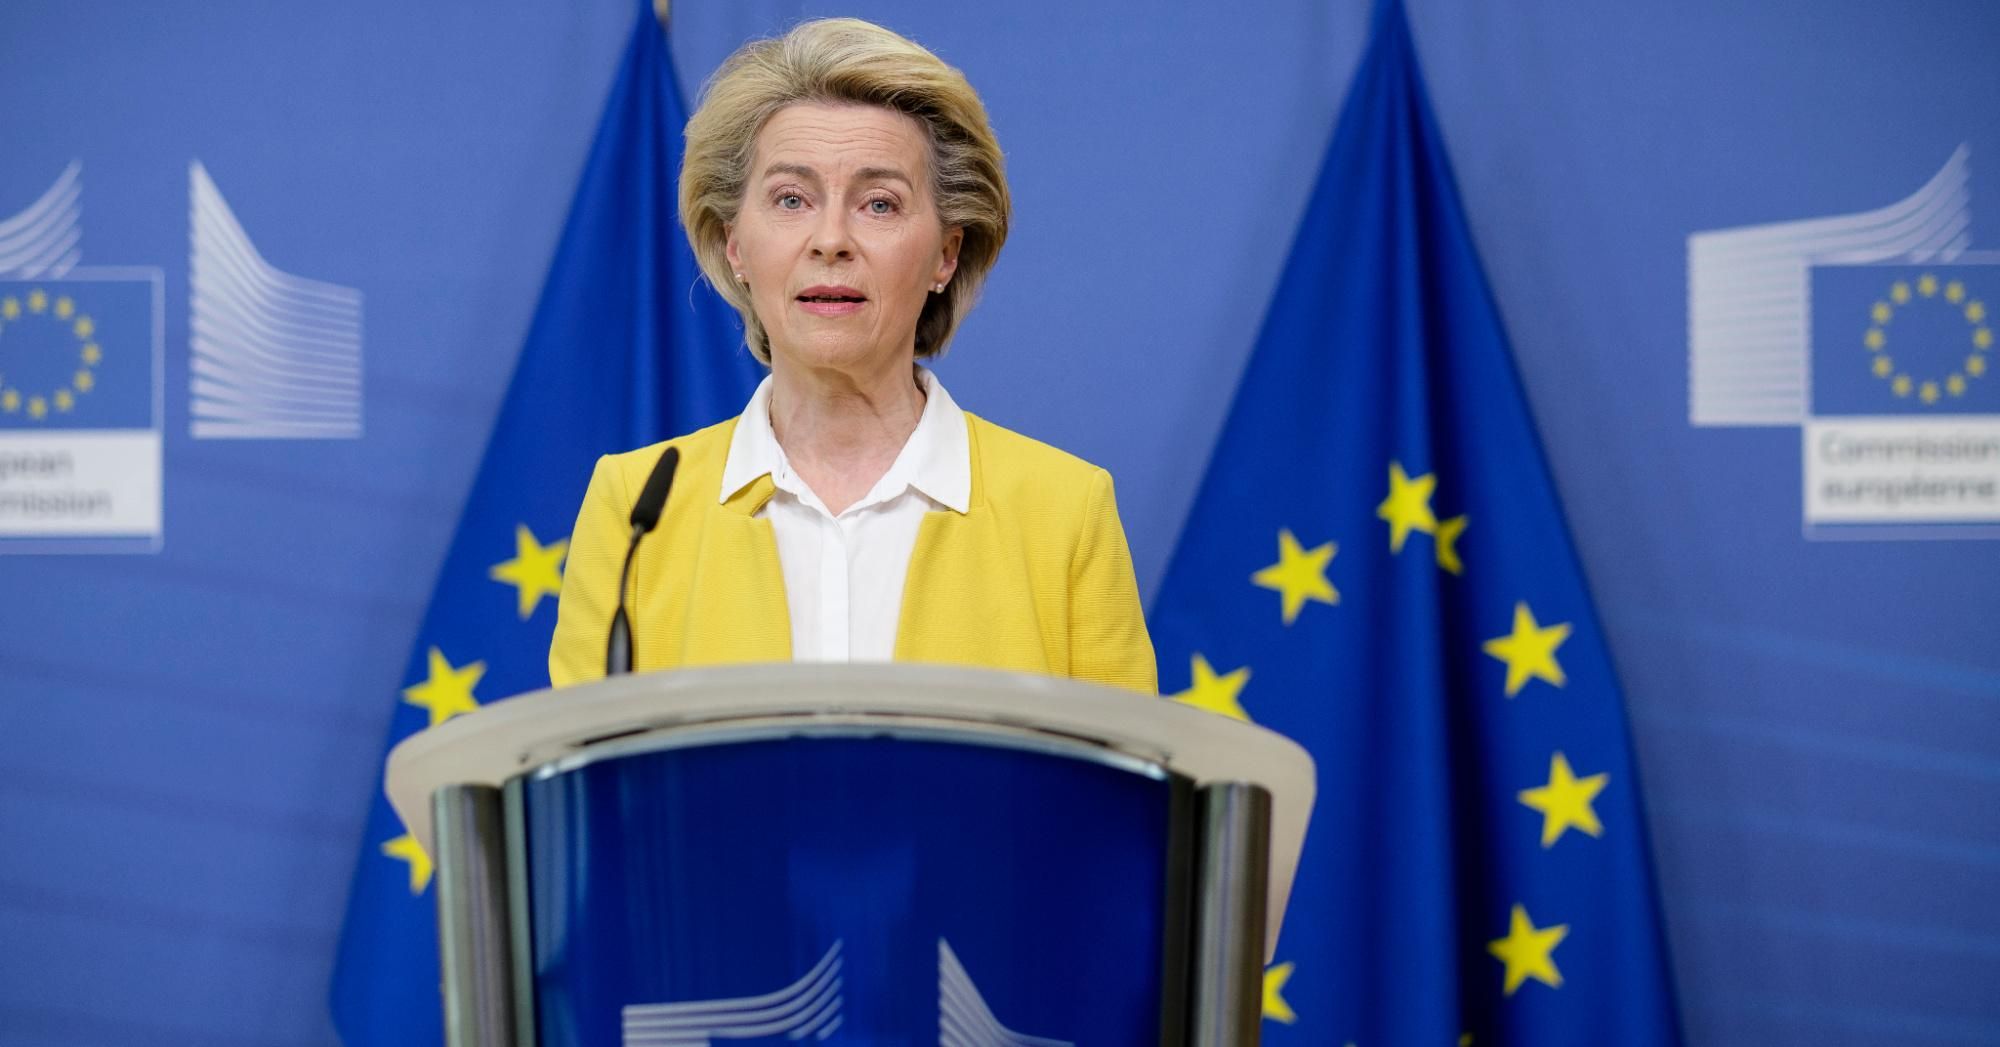 President of the European Commission Ursula von der Leyen talks during a press briefing on Covid-19 vaccination developments on April 14, 2021 in Brussels. (Photo: Thierry Monasse/Getty Images)